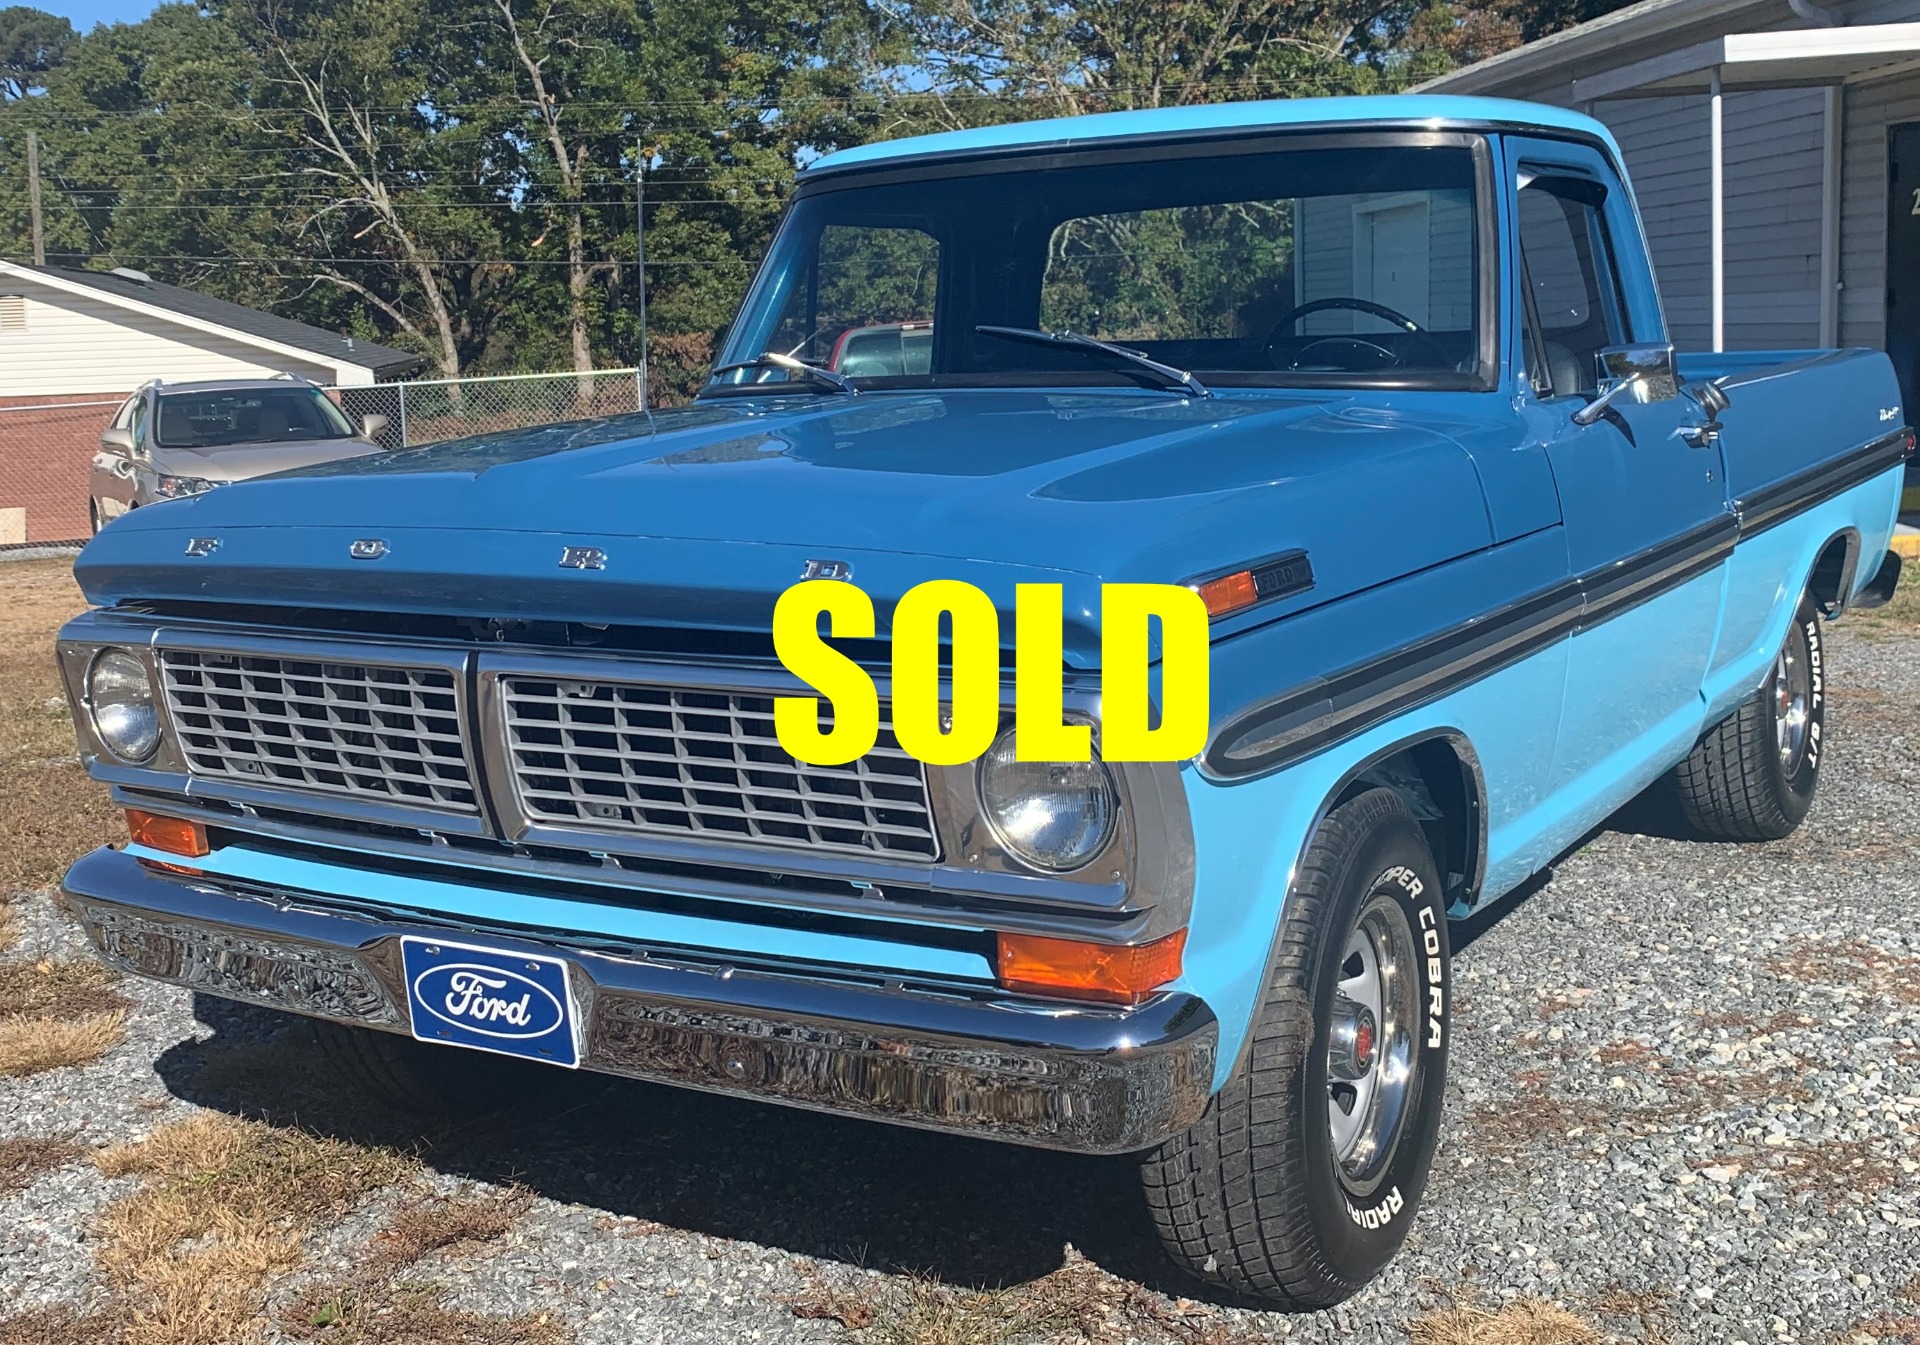 Used 1970 Ford F-100 Pickup Truck  221 , For Sale $37500, Call Us: (704) 996-3735